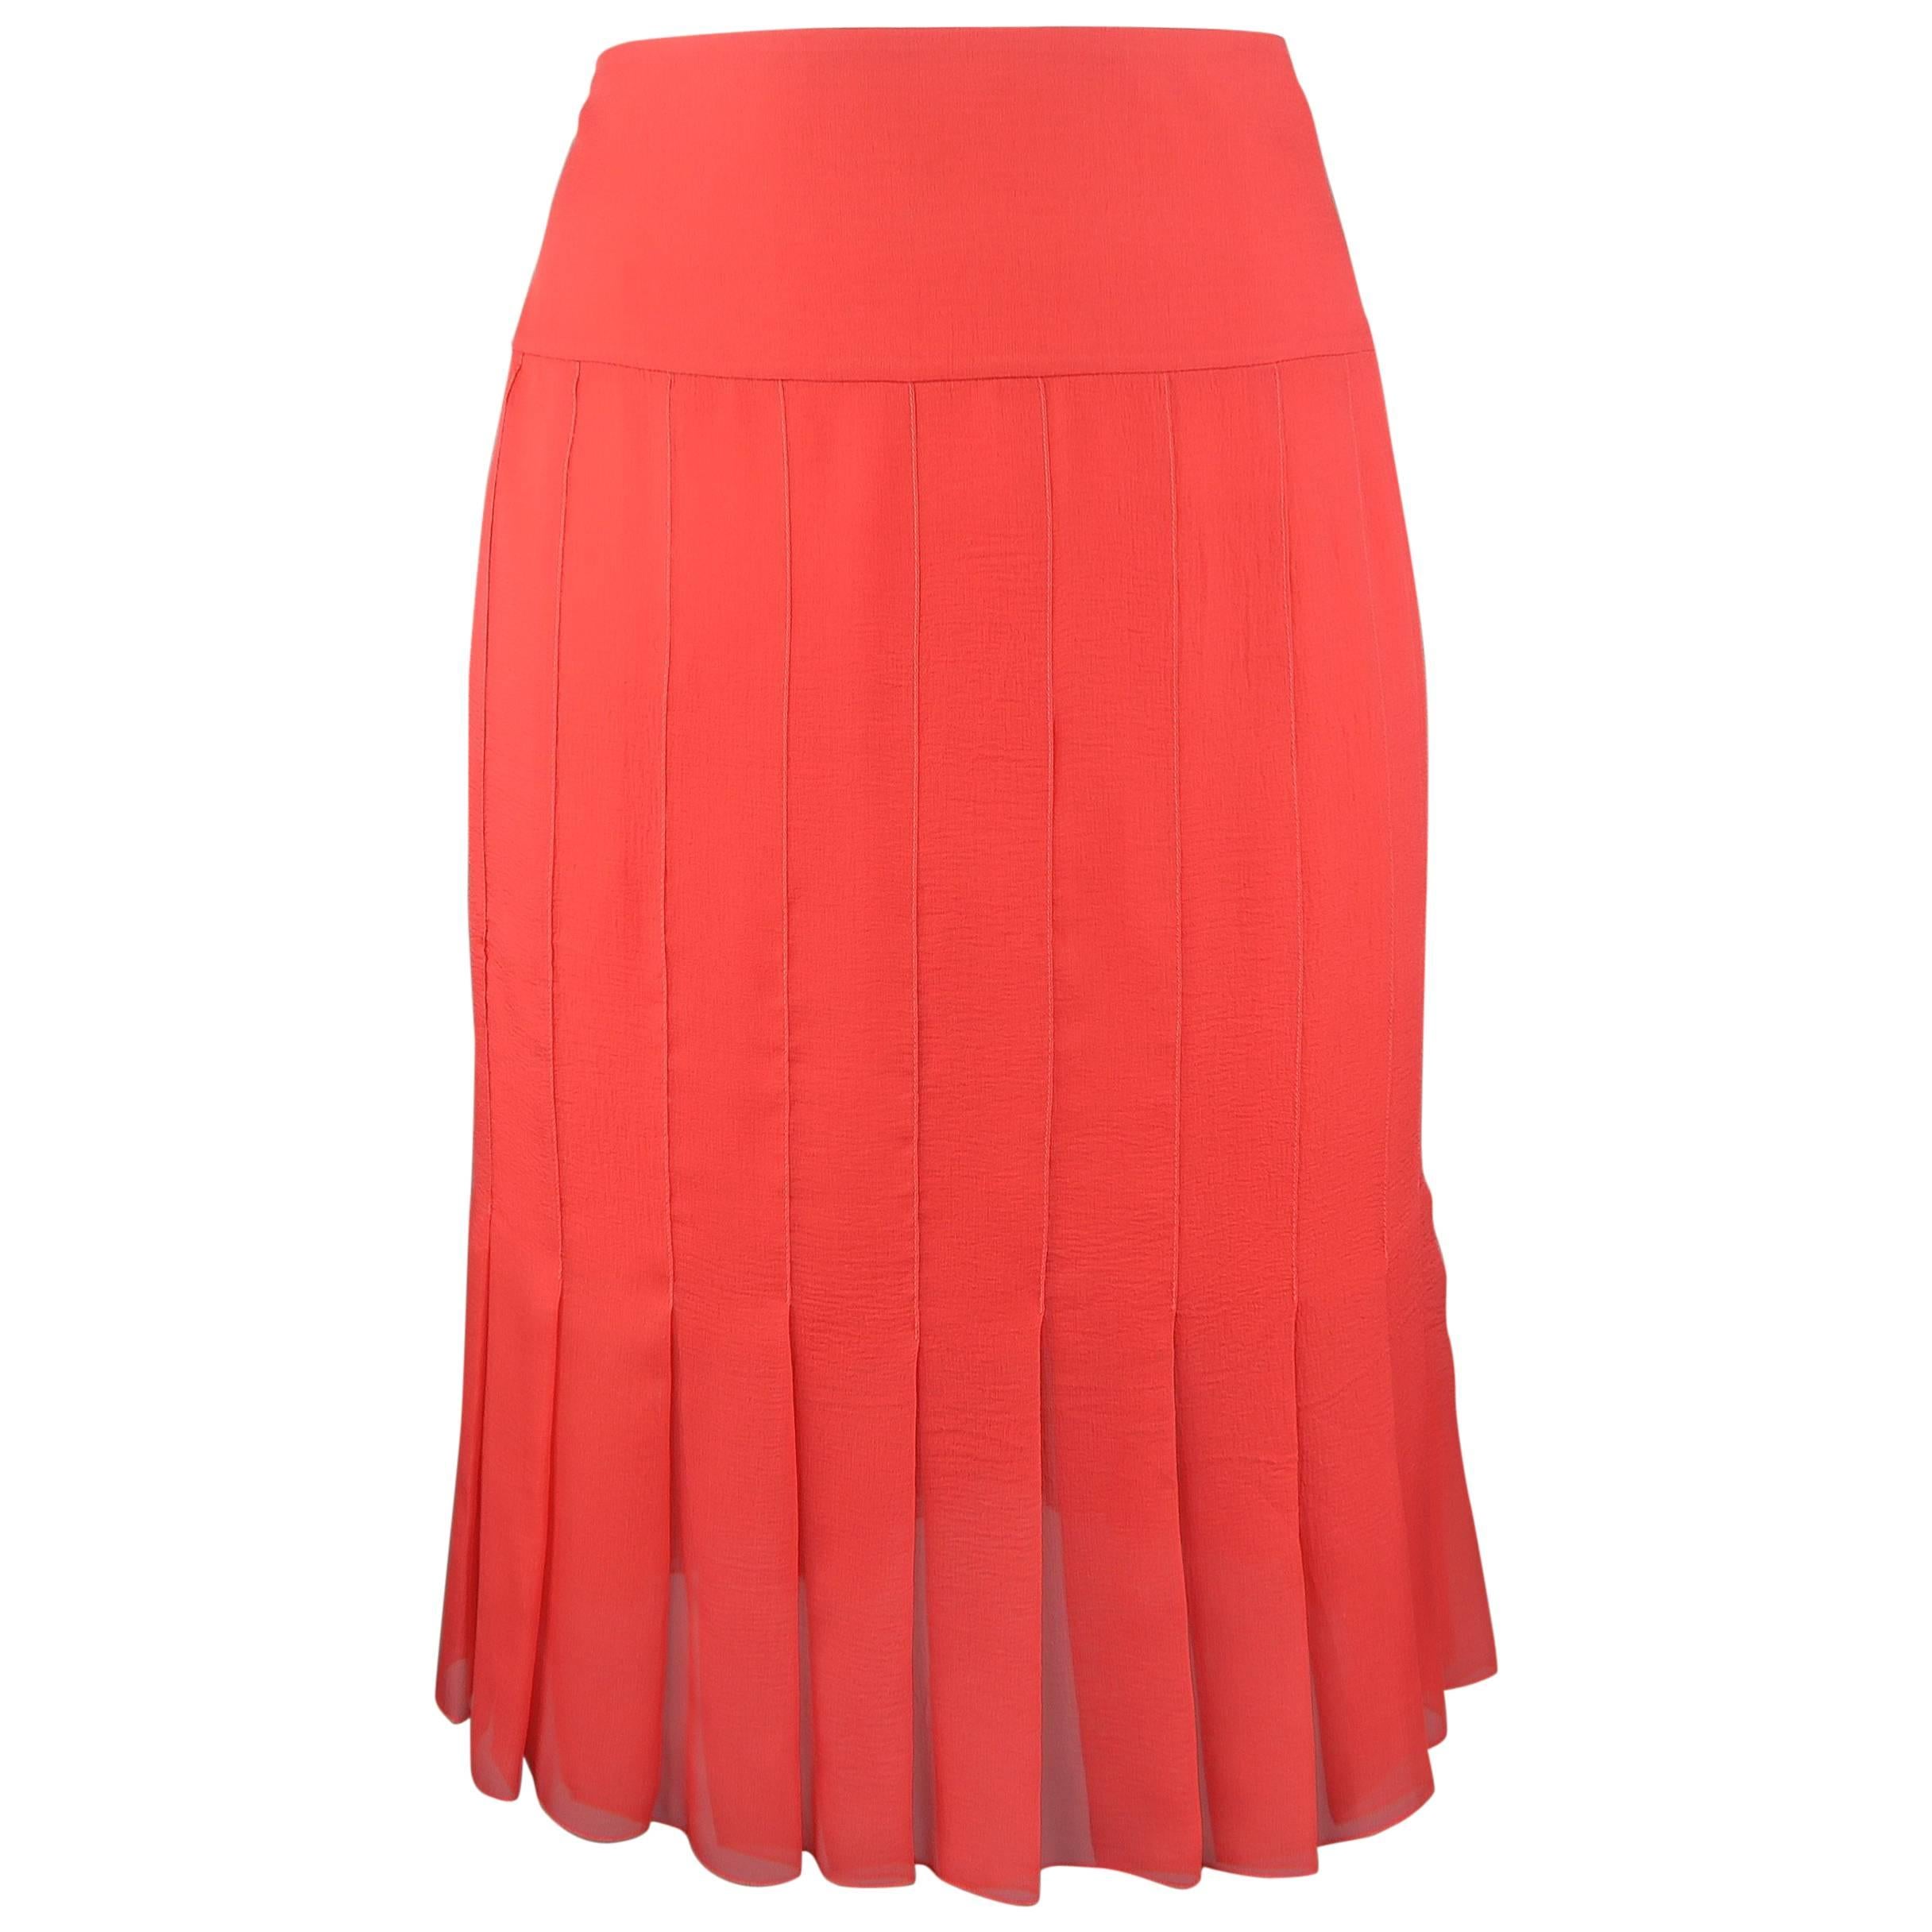 CHANEL Size 8 Red Silk Chiffon Pleated Pencil Skirt